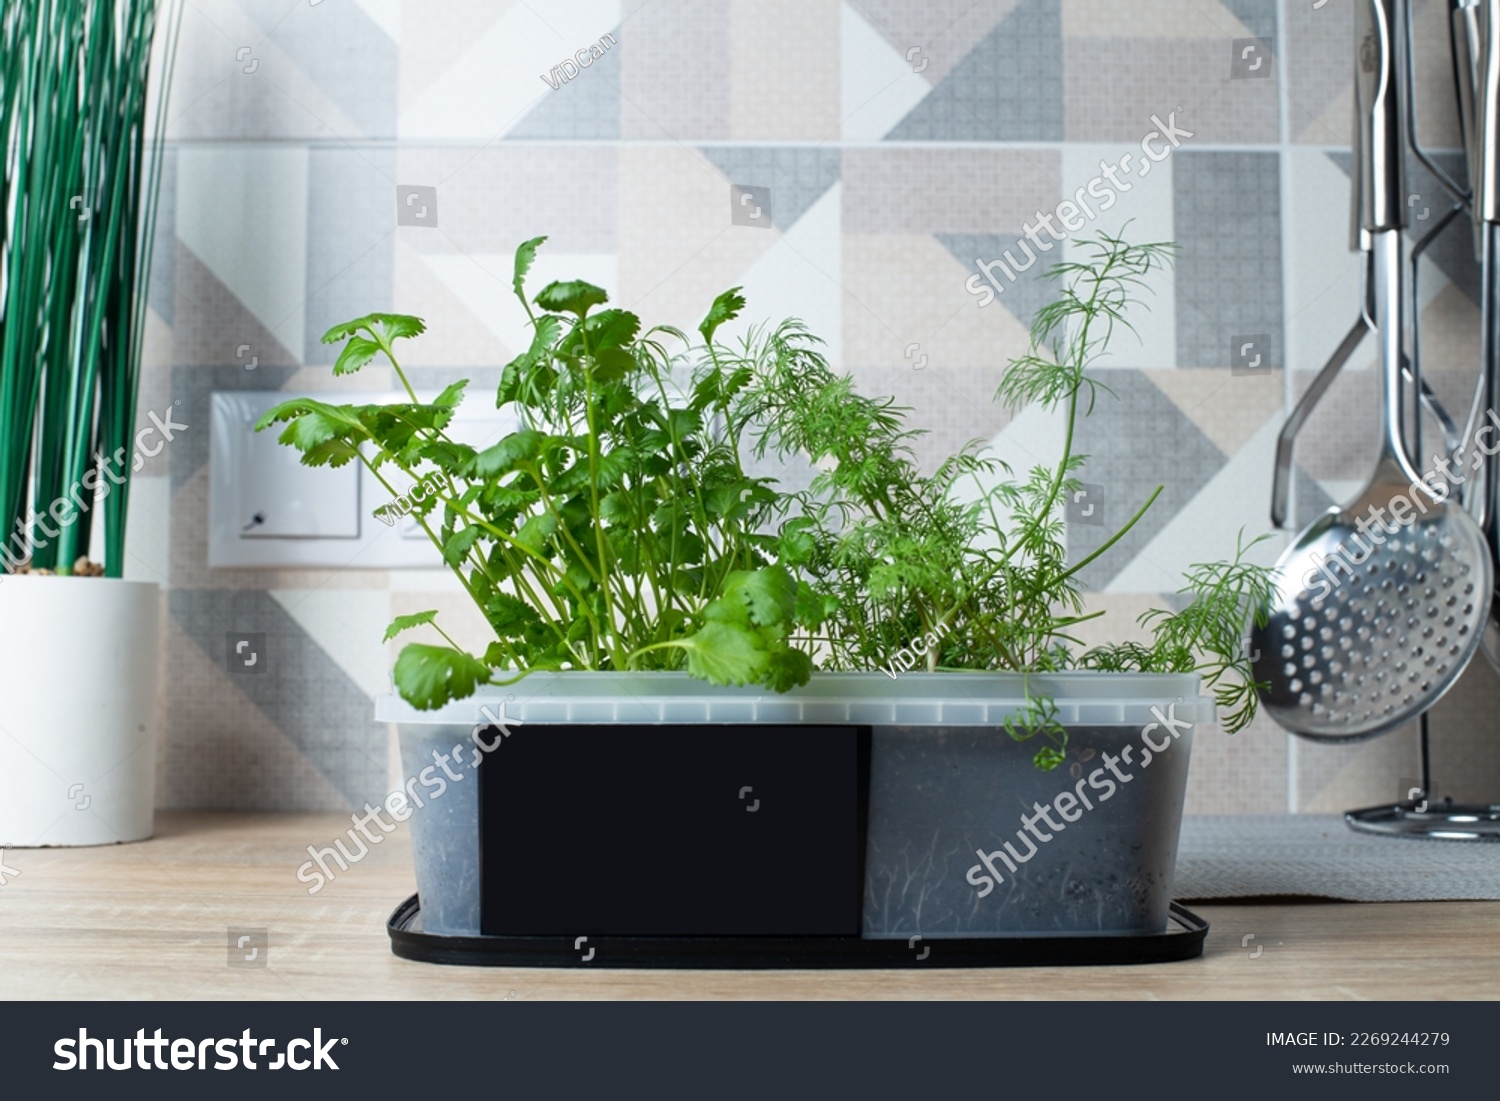 parsley and dill growing in a pot. grow seedlings at home. garden in the apartment #2269244279